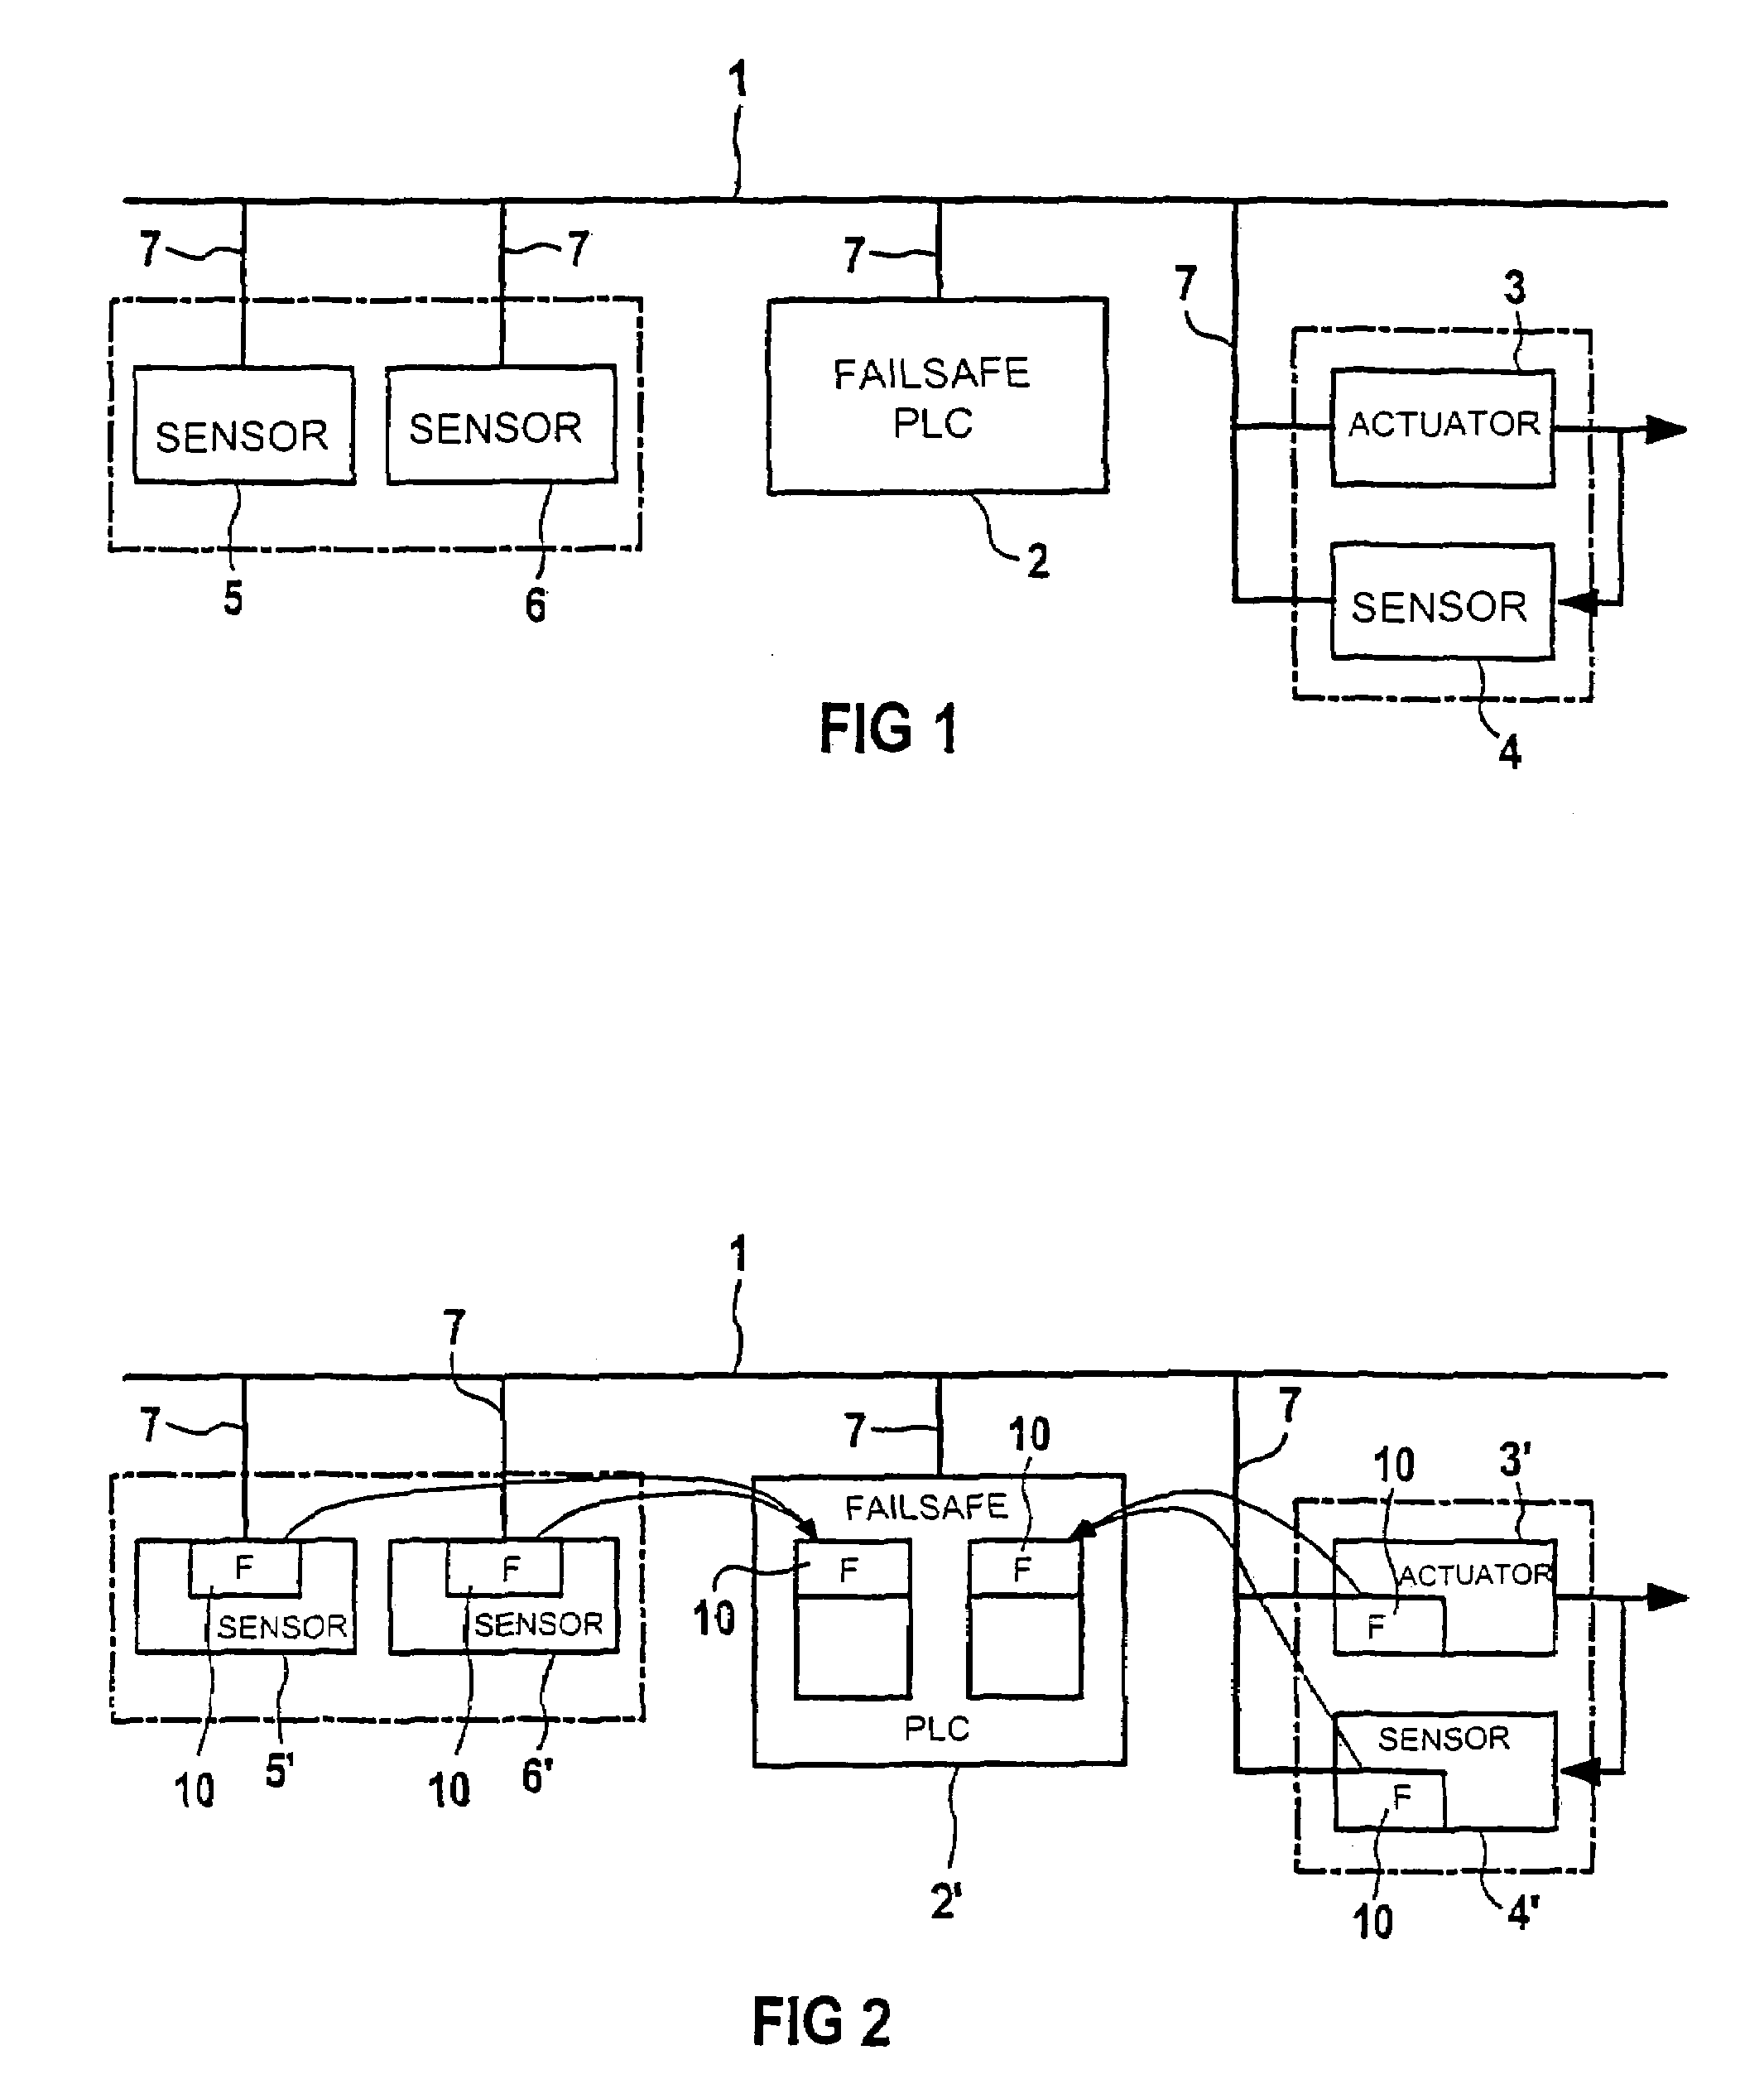 Microprocessor-controlled field device for connection to a field bus system